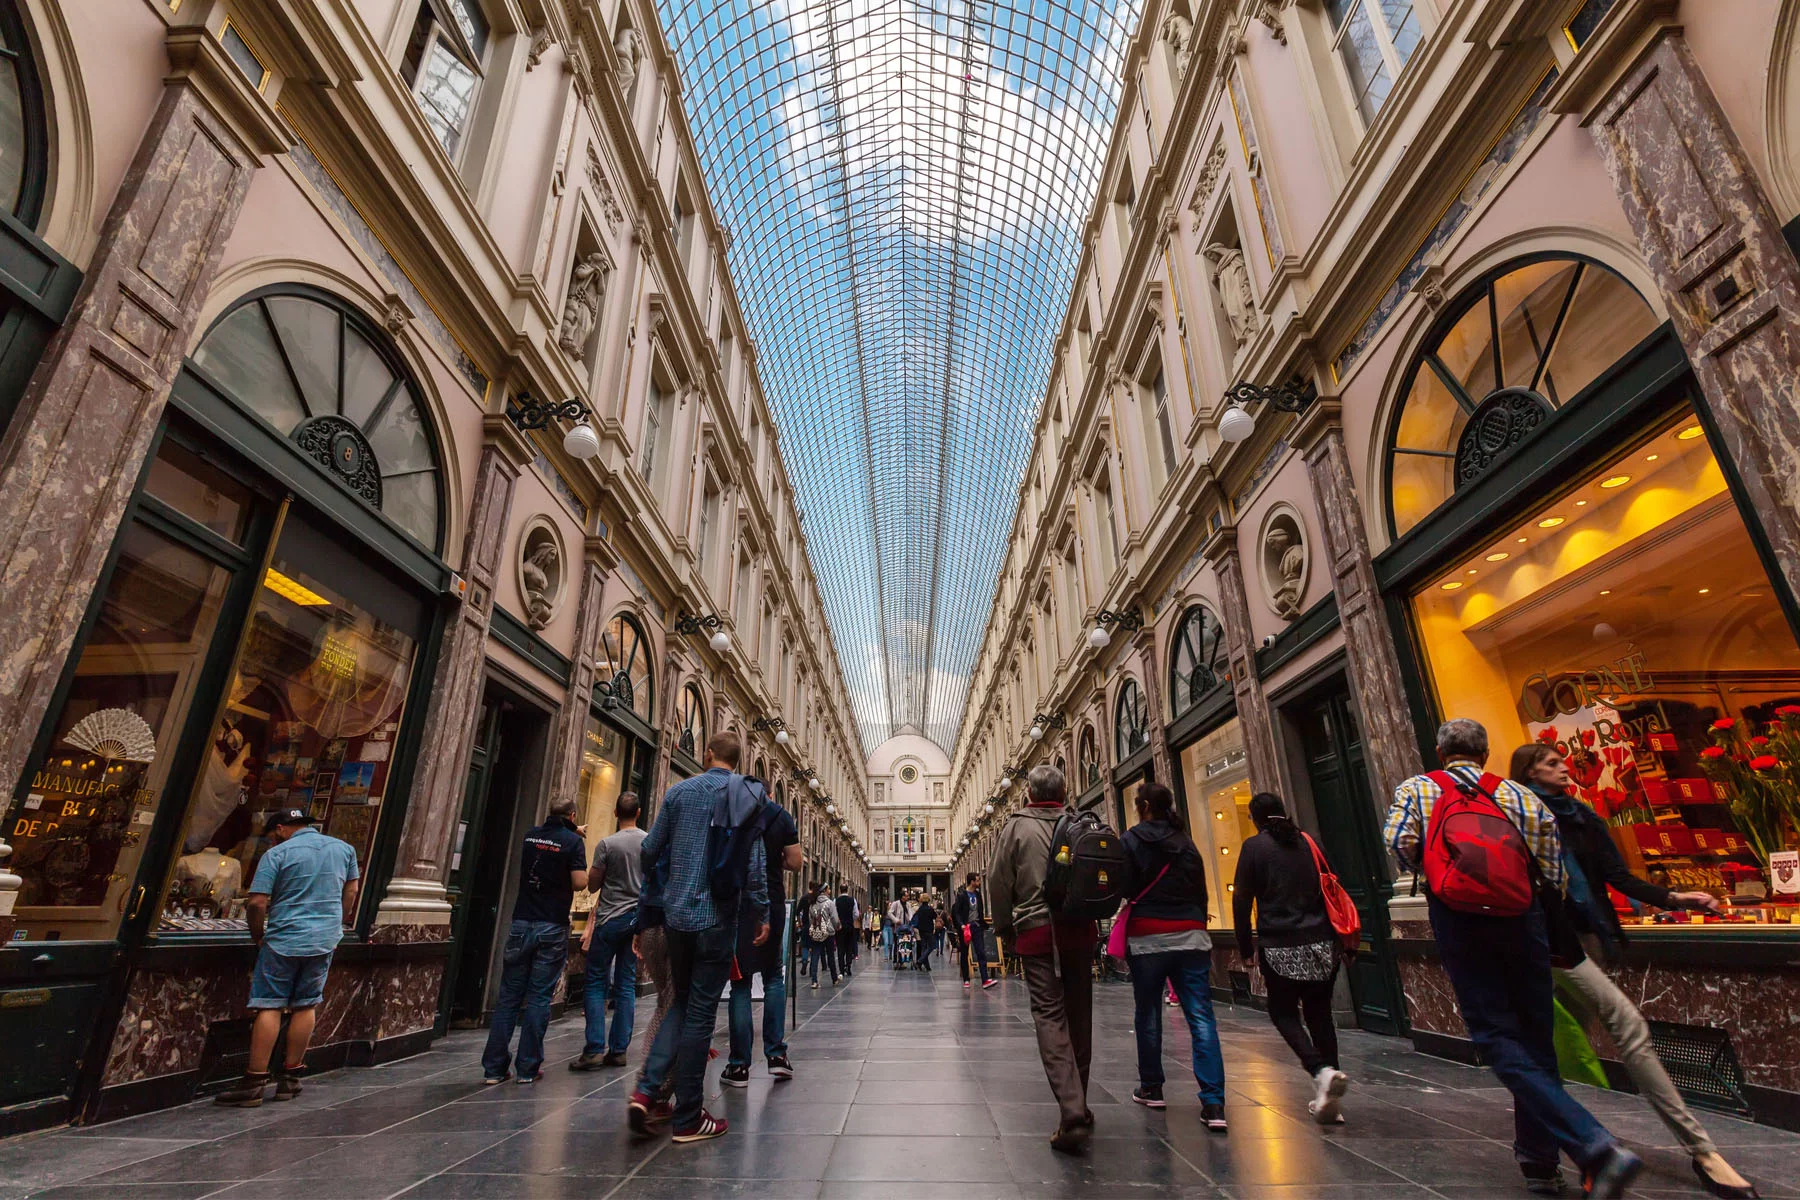 A shopping arcade in Brussels